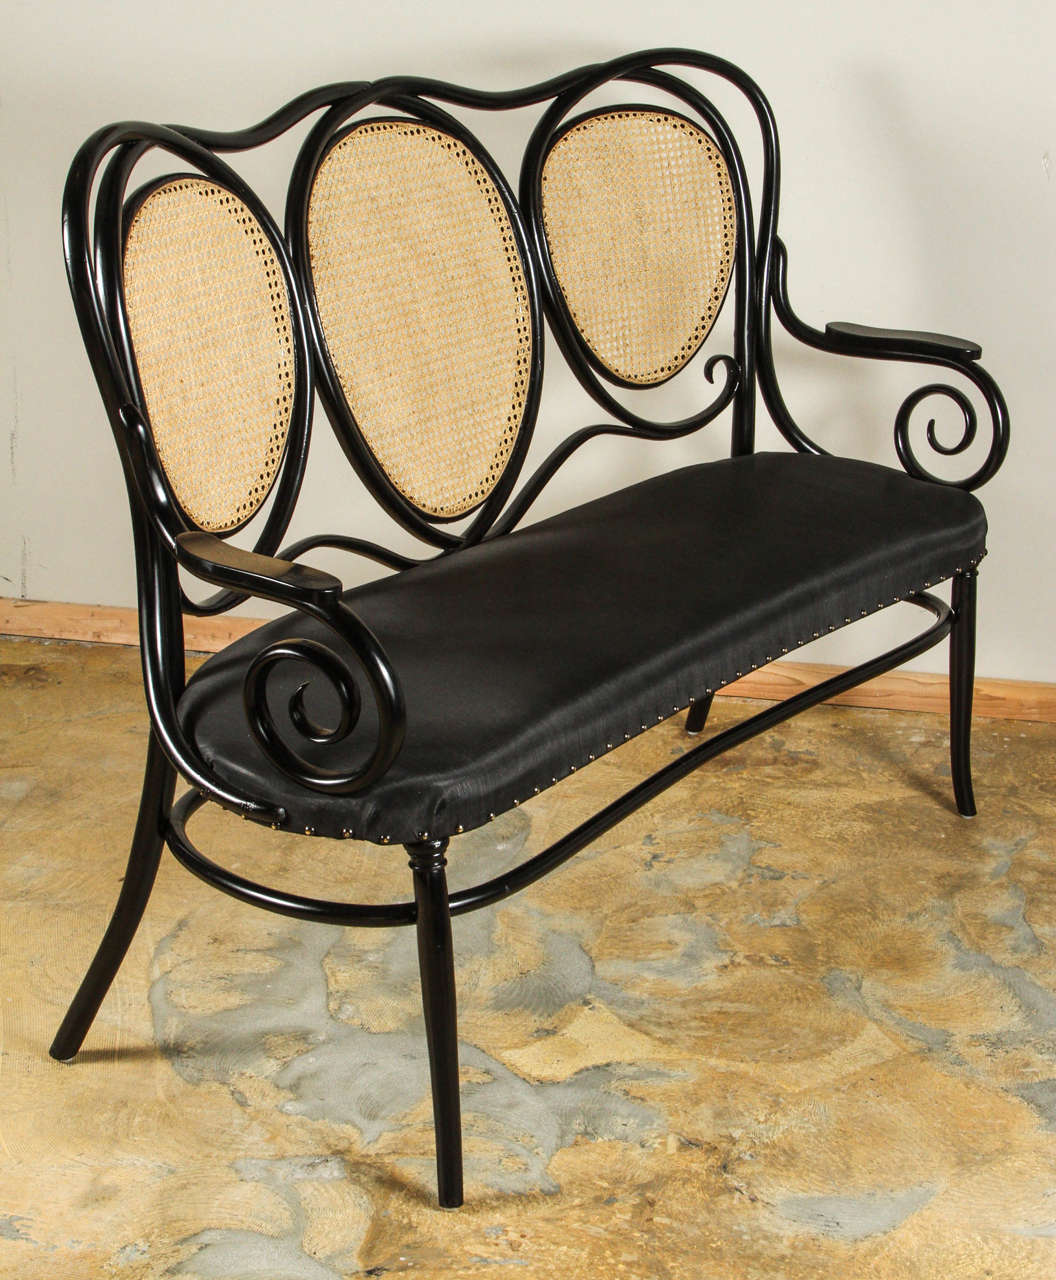 Thonet settee totally restored including new horsehair upholstery and nailhead trim.